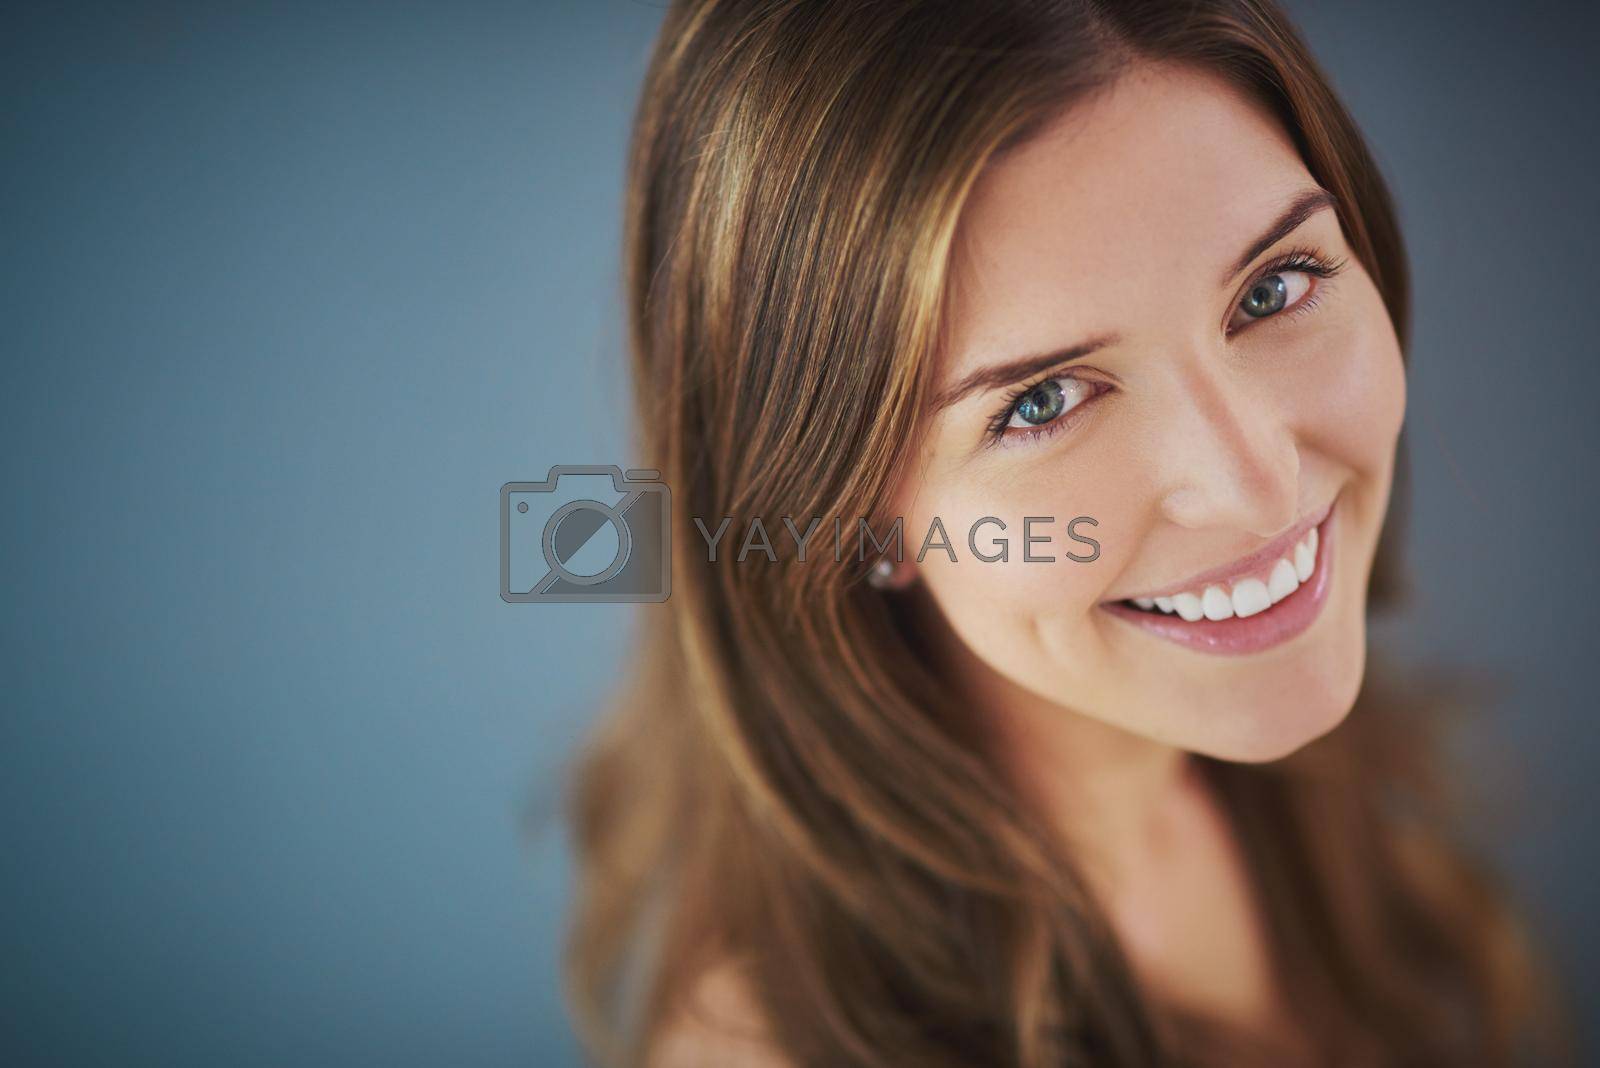 Royalty free image of Her smile is like no other. High angle studio shot of an attractive young woman smiling against a gray background. by YuriArcurs